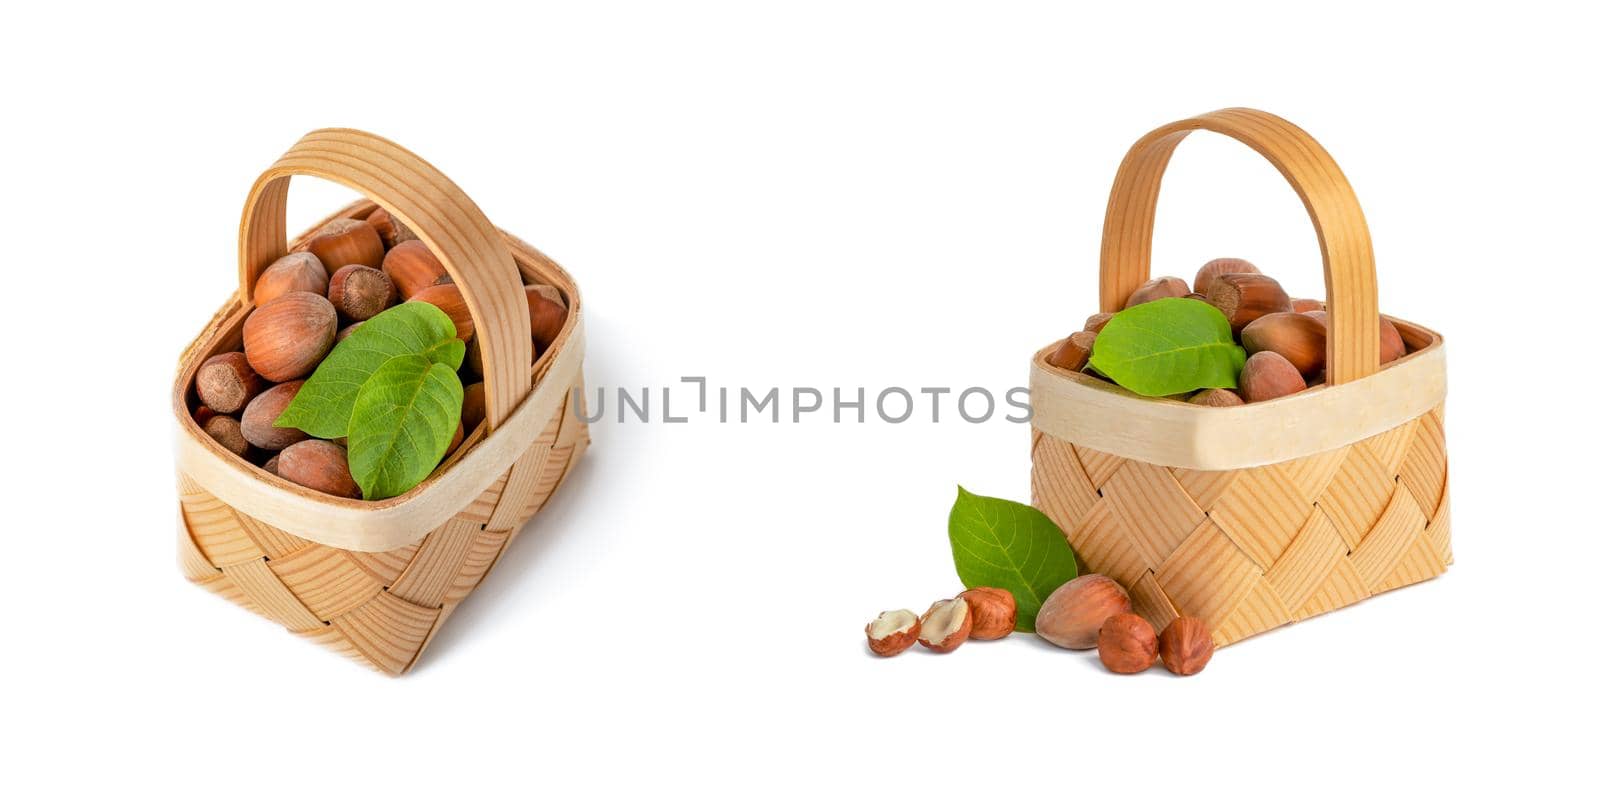 Hazelnut lies in a wooden basket on a white isolated background. Unpeeled hazelnuts in shell and green leaves by SERSOL